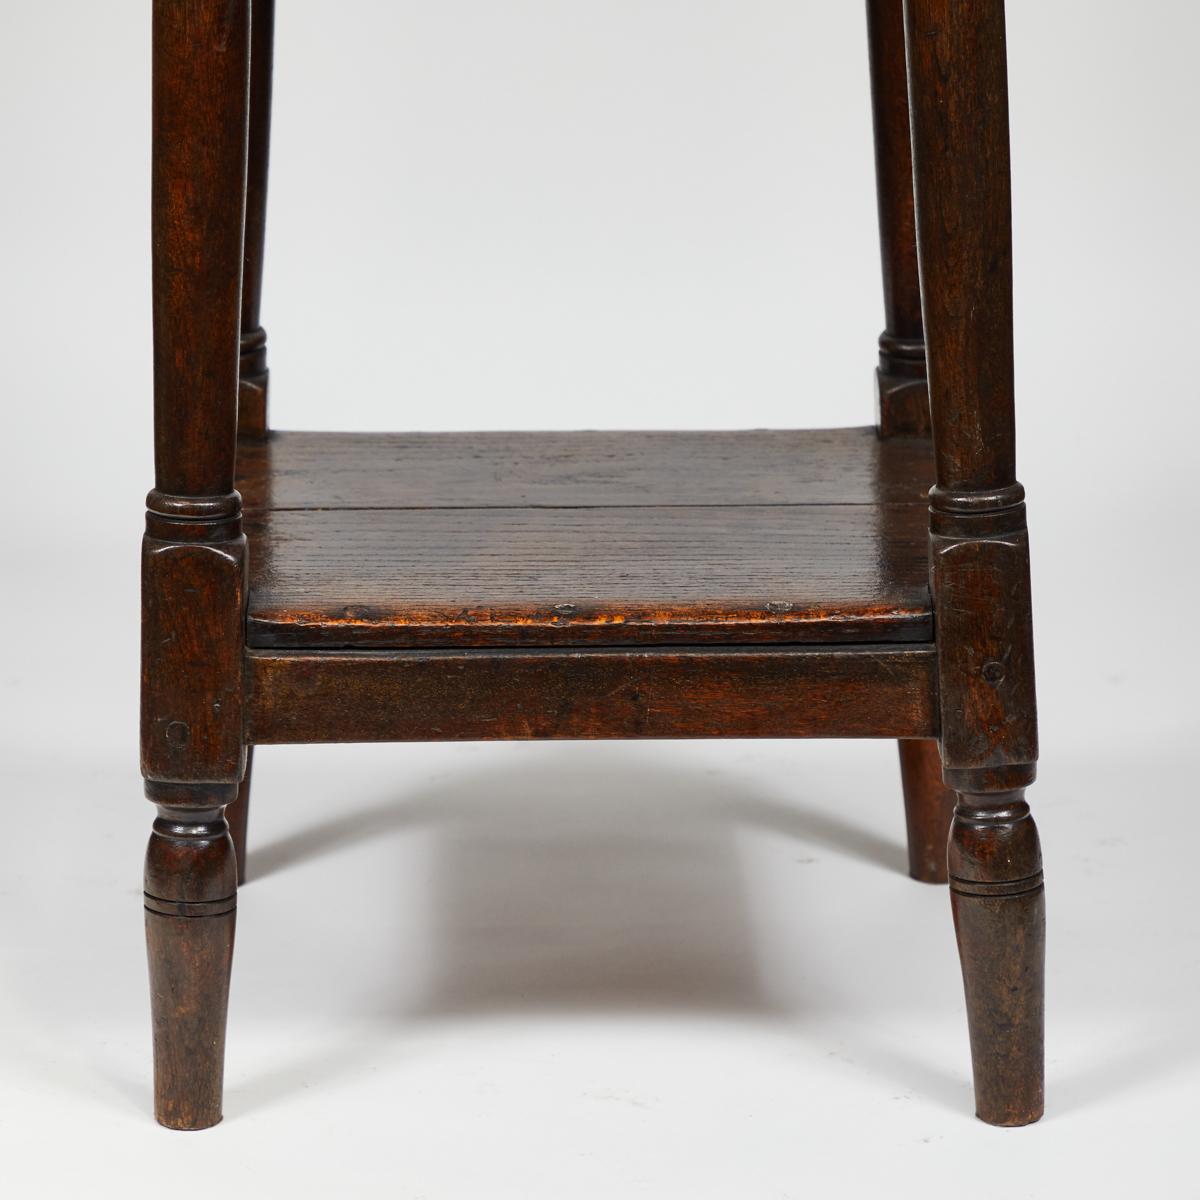 Late 19th Century Tall Upholstered English Stool with Bottom Shelf For Sale 3